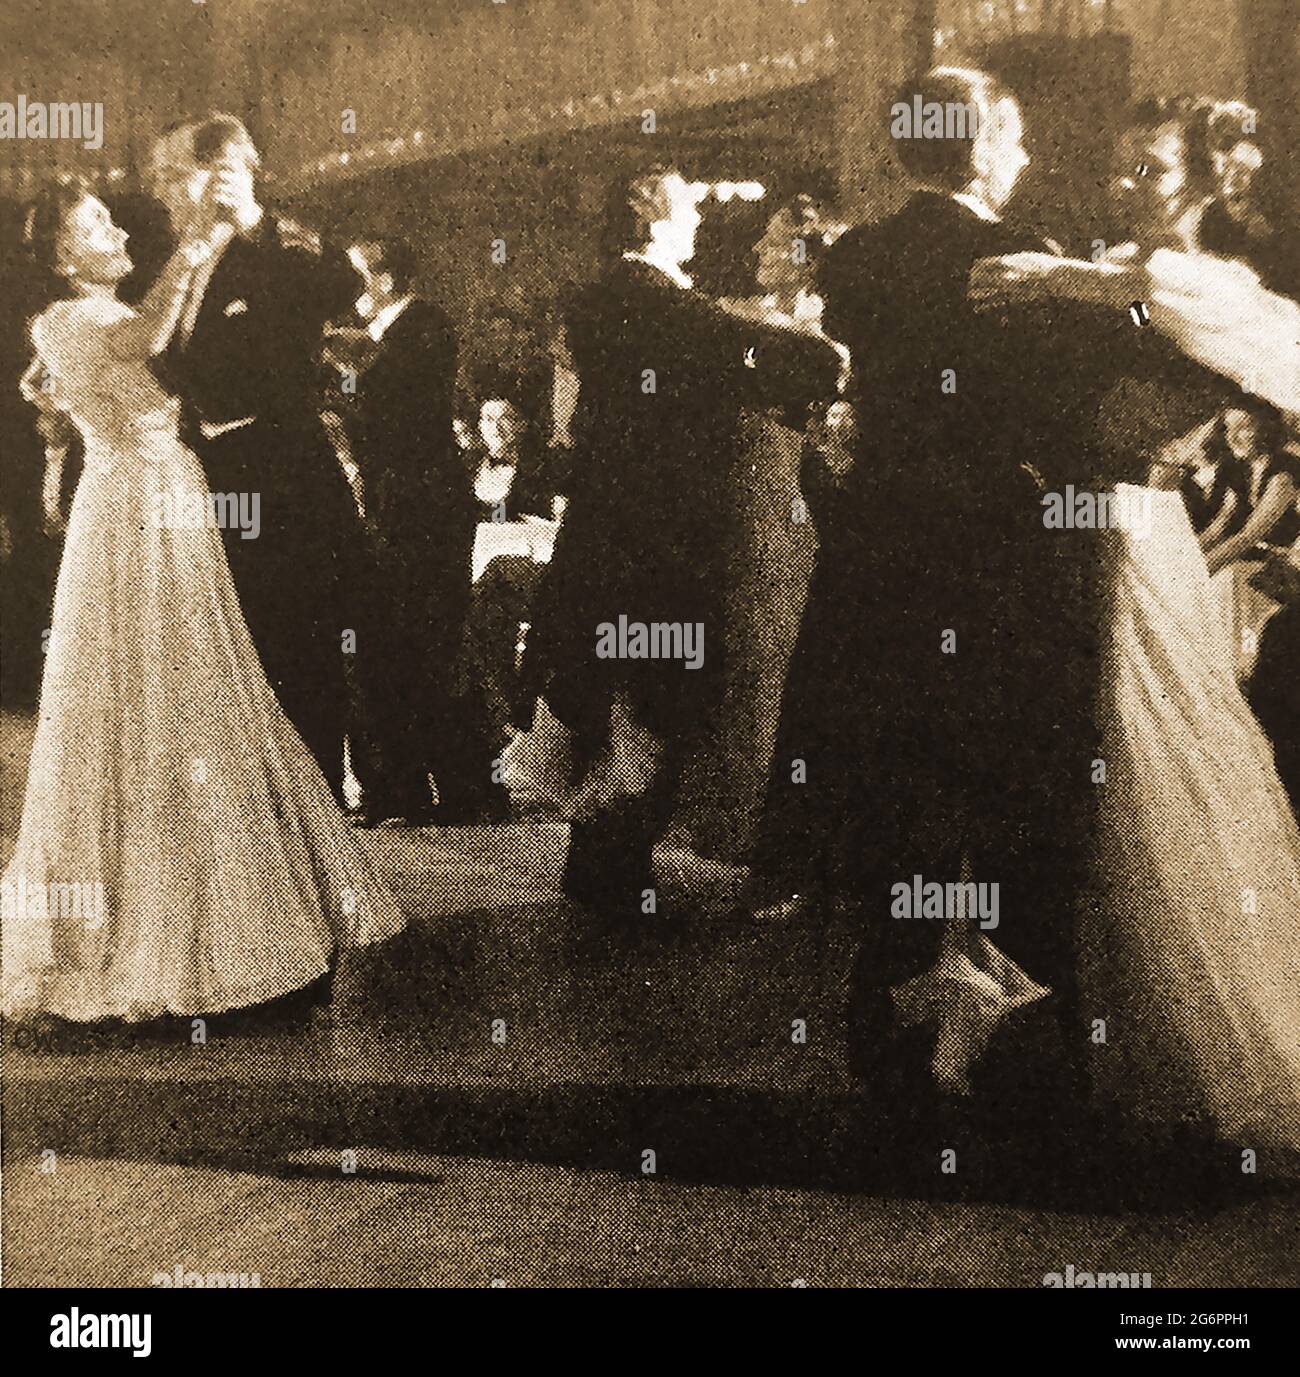 Ballroom dancing. A press image of British dancers enjoying a quickstep, circa 1940, in formal dress. The quickstep is considered by some to be a very fast foxtrot or a onestep. Stock Photo